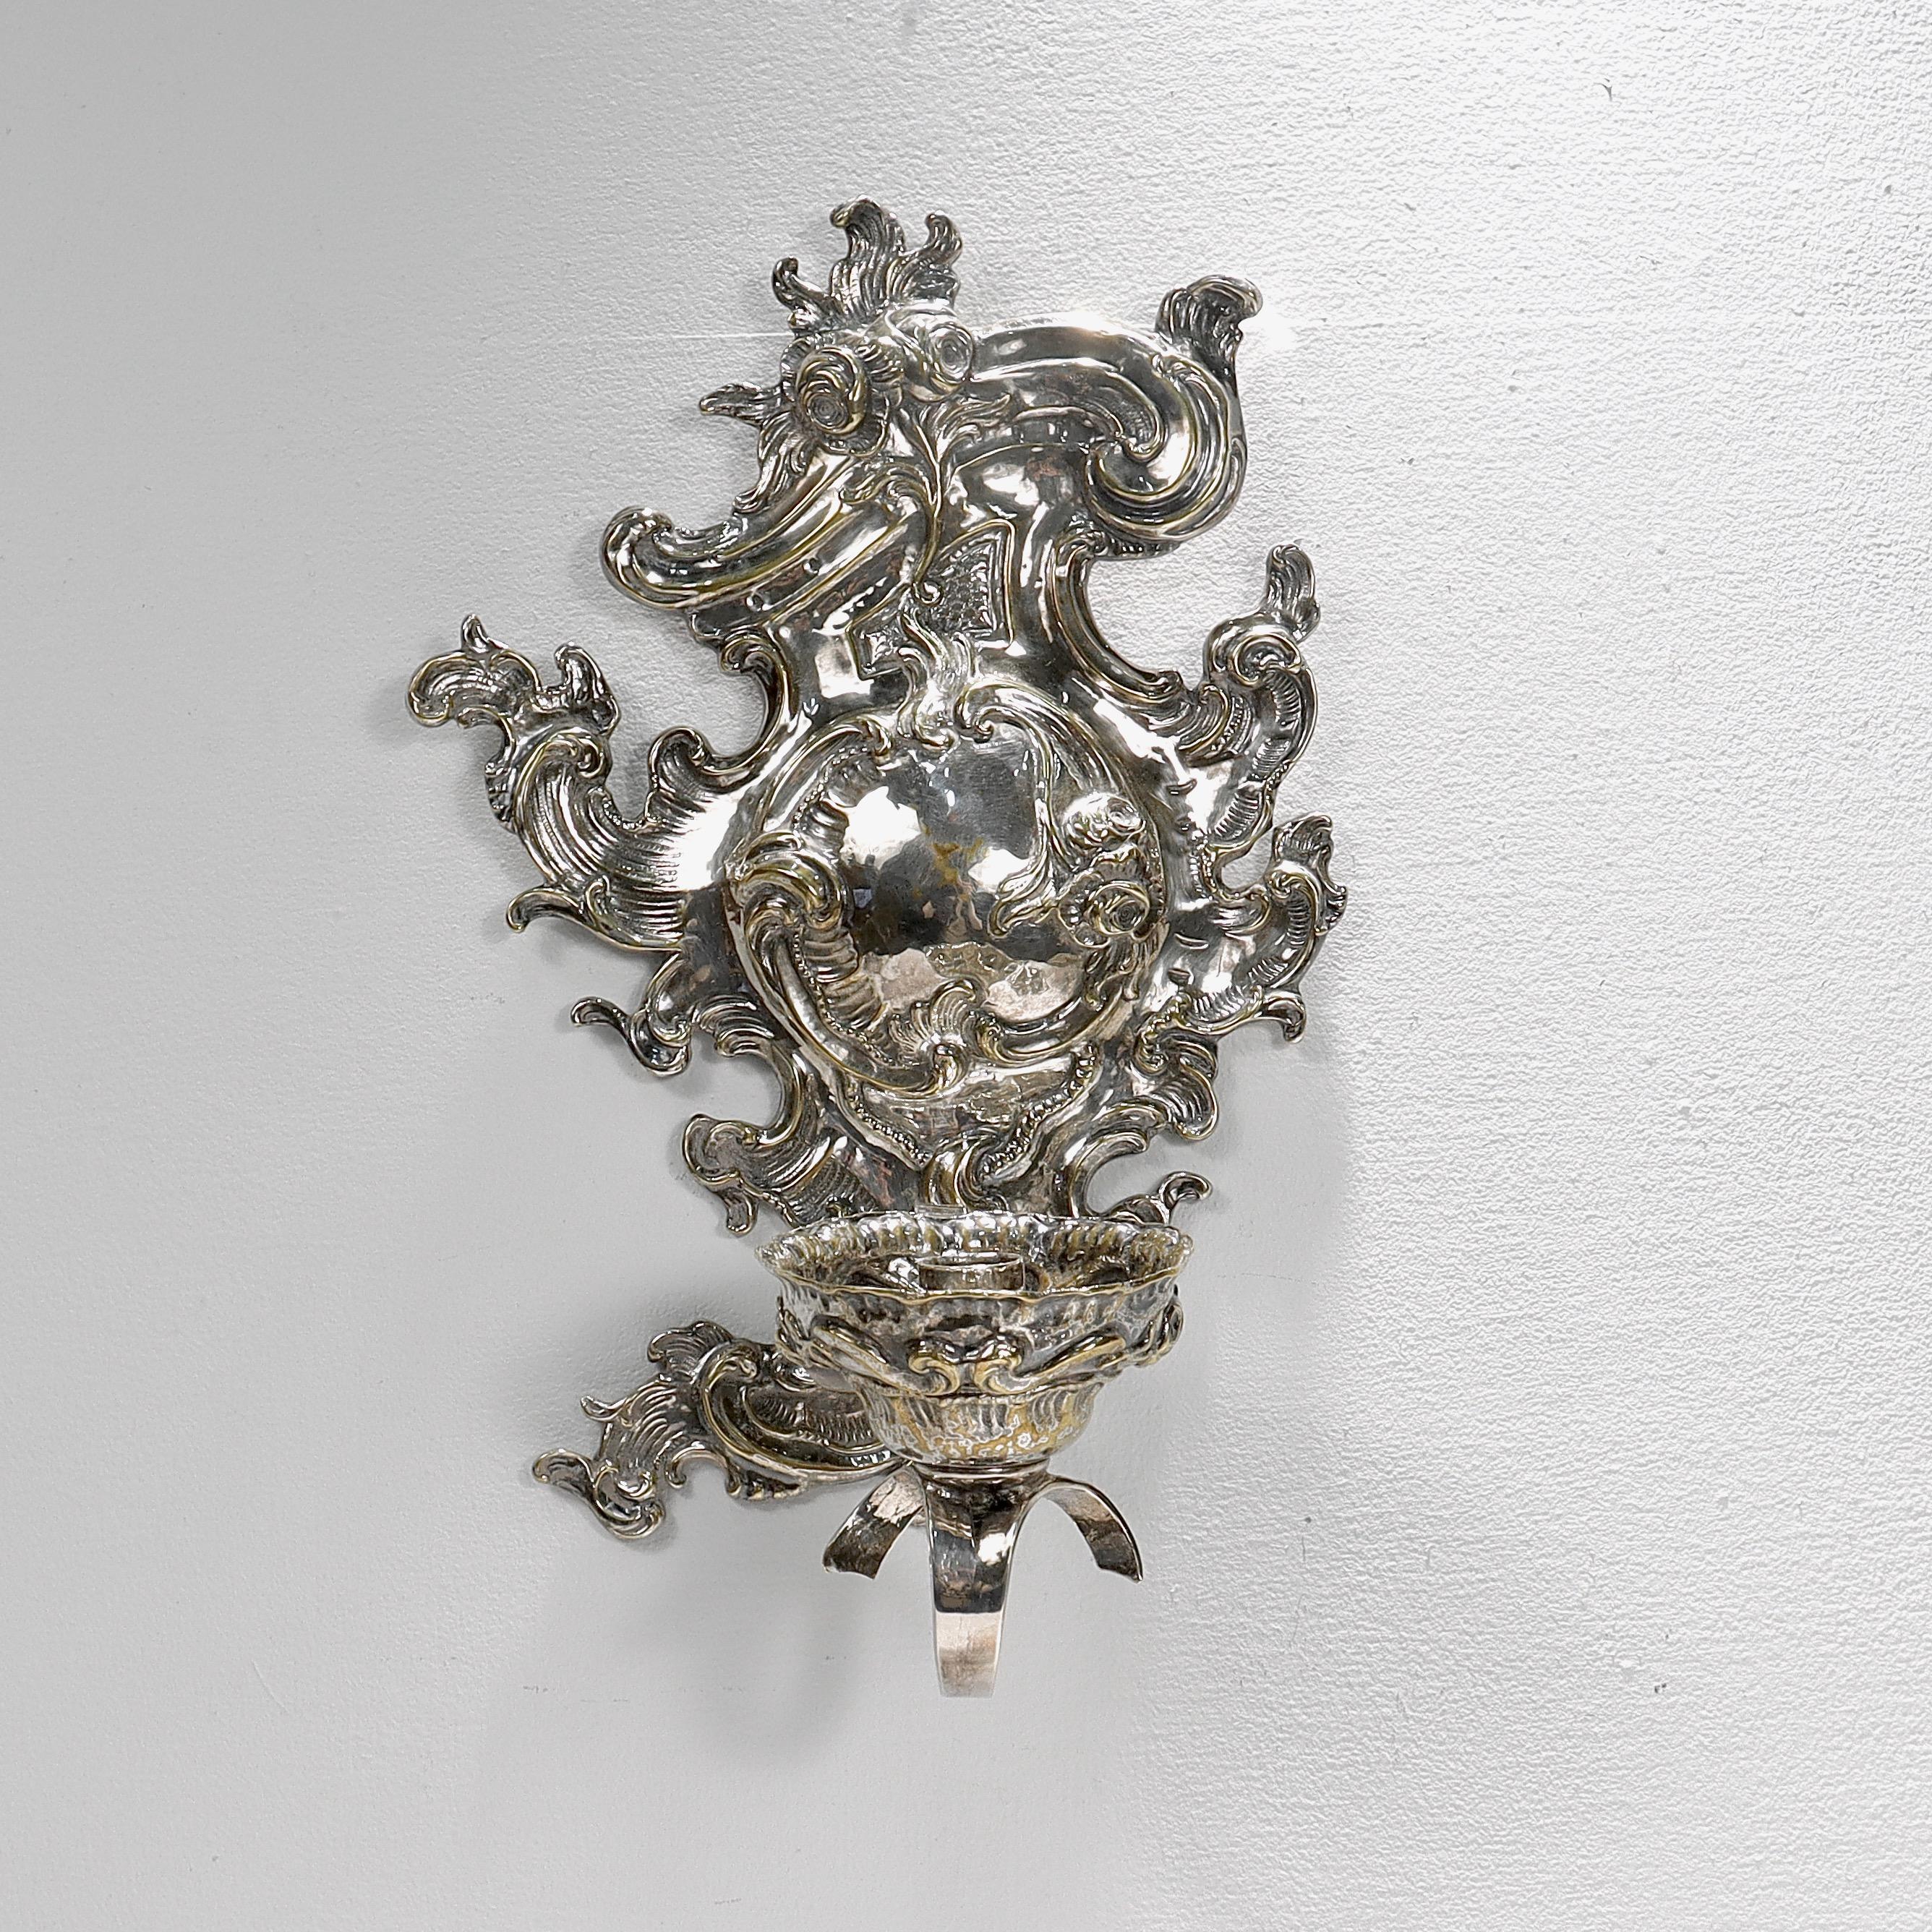 Antique Rococo or Rococo Revival Silver Plated Wall Sconces For Sale 1